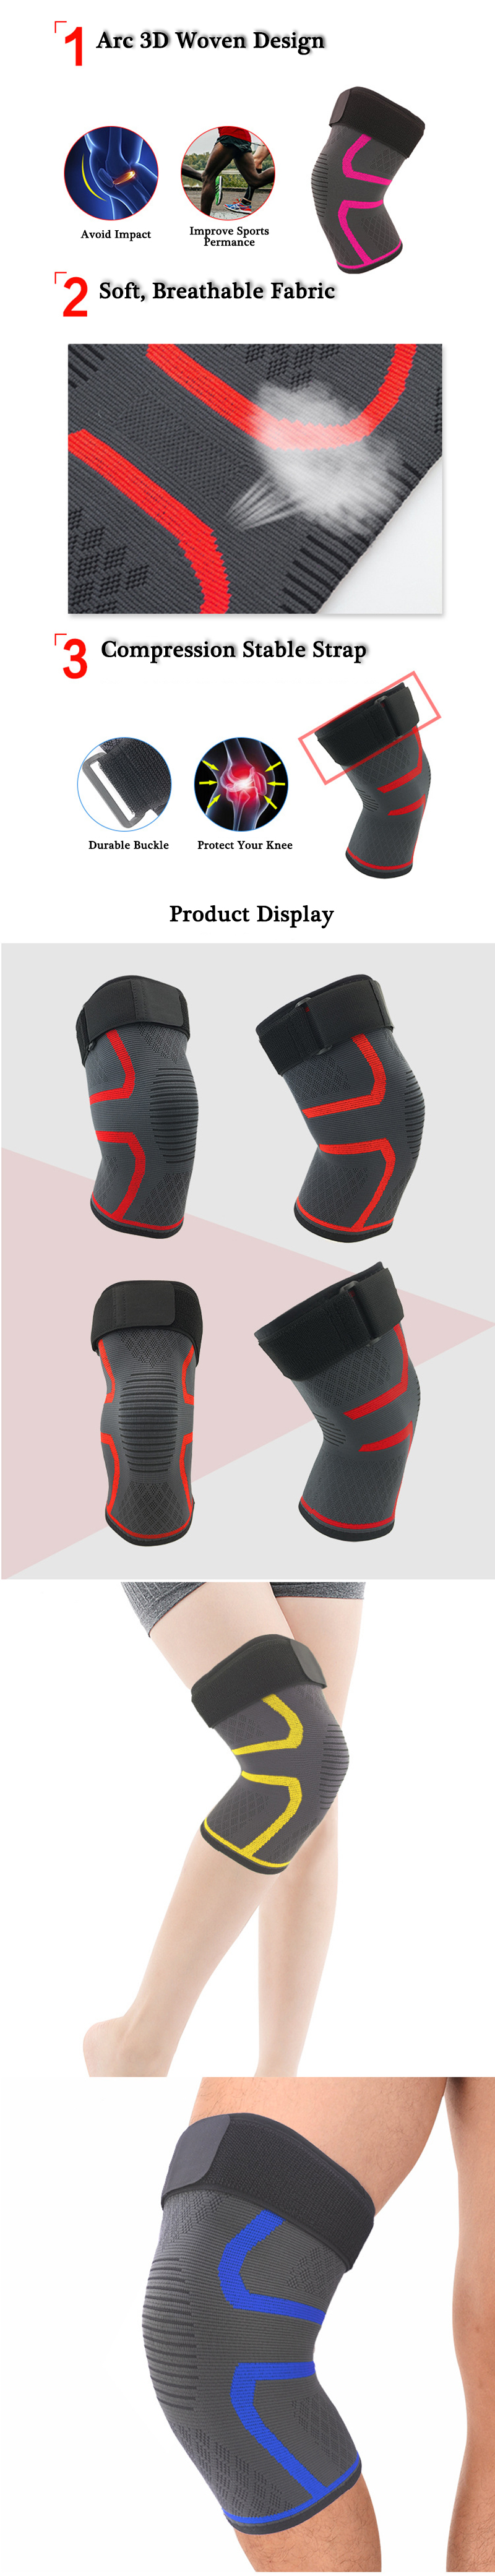 KALOAD-Nylon-Sports-Protective-Fitness-Knee-Pad-Support-Breathable-Gym-Exercise-Knee-Brace-Protector-1358153-3